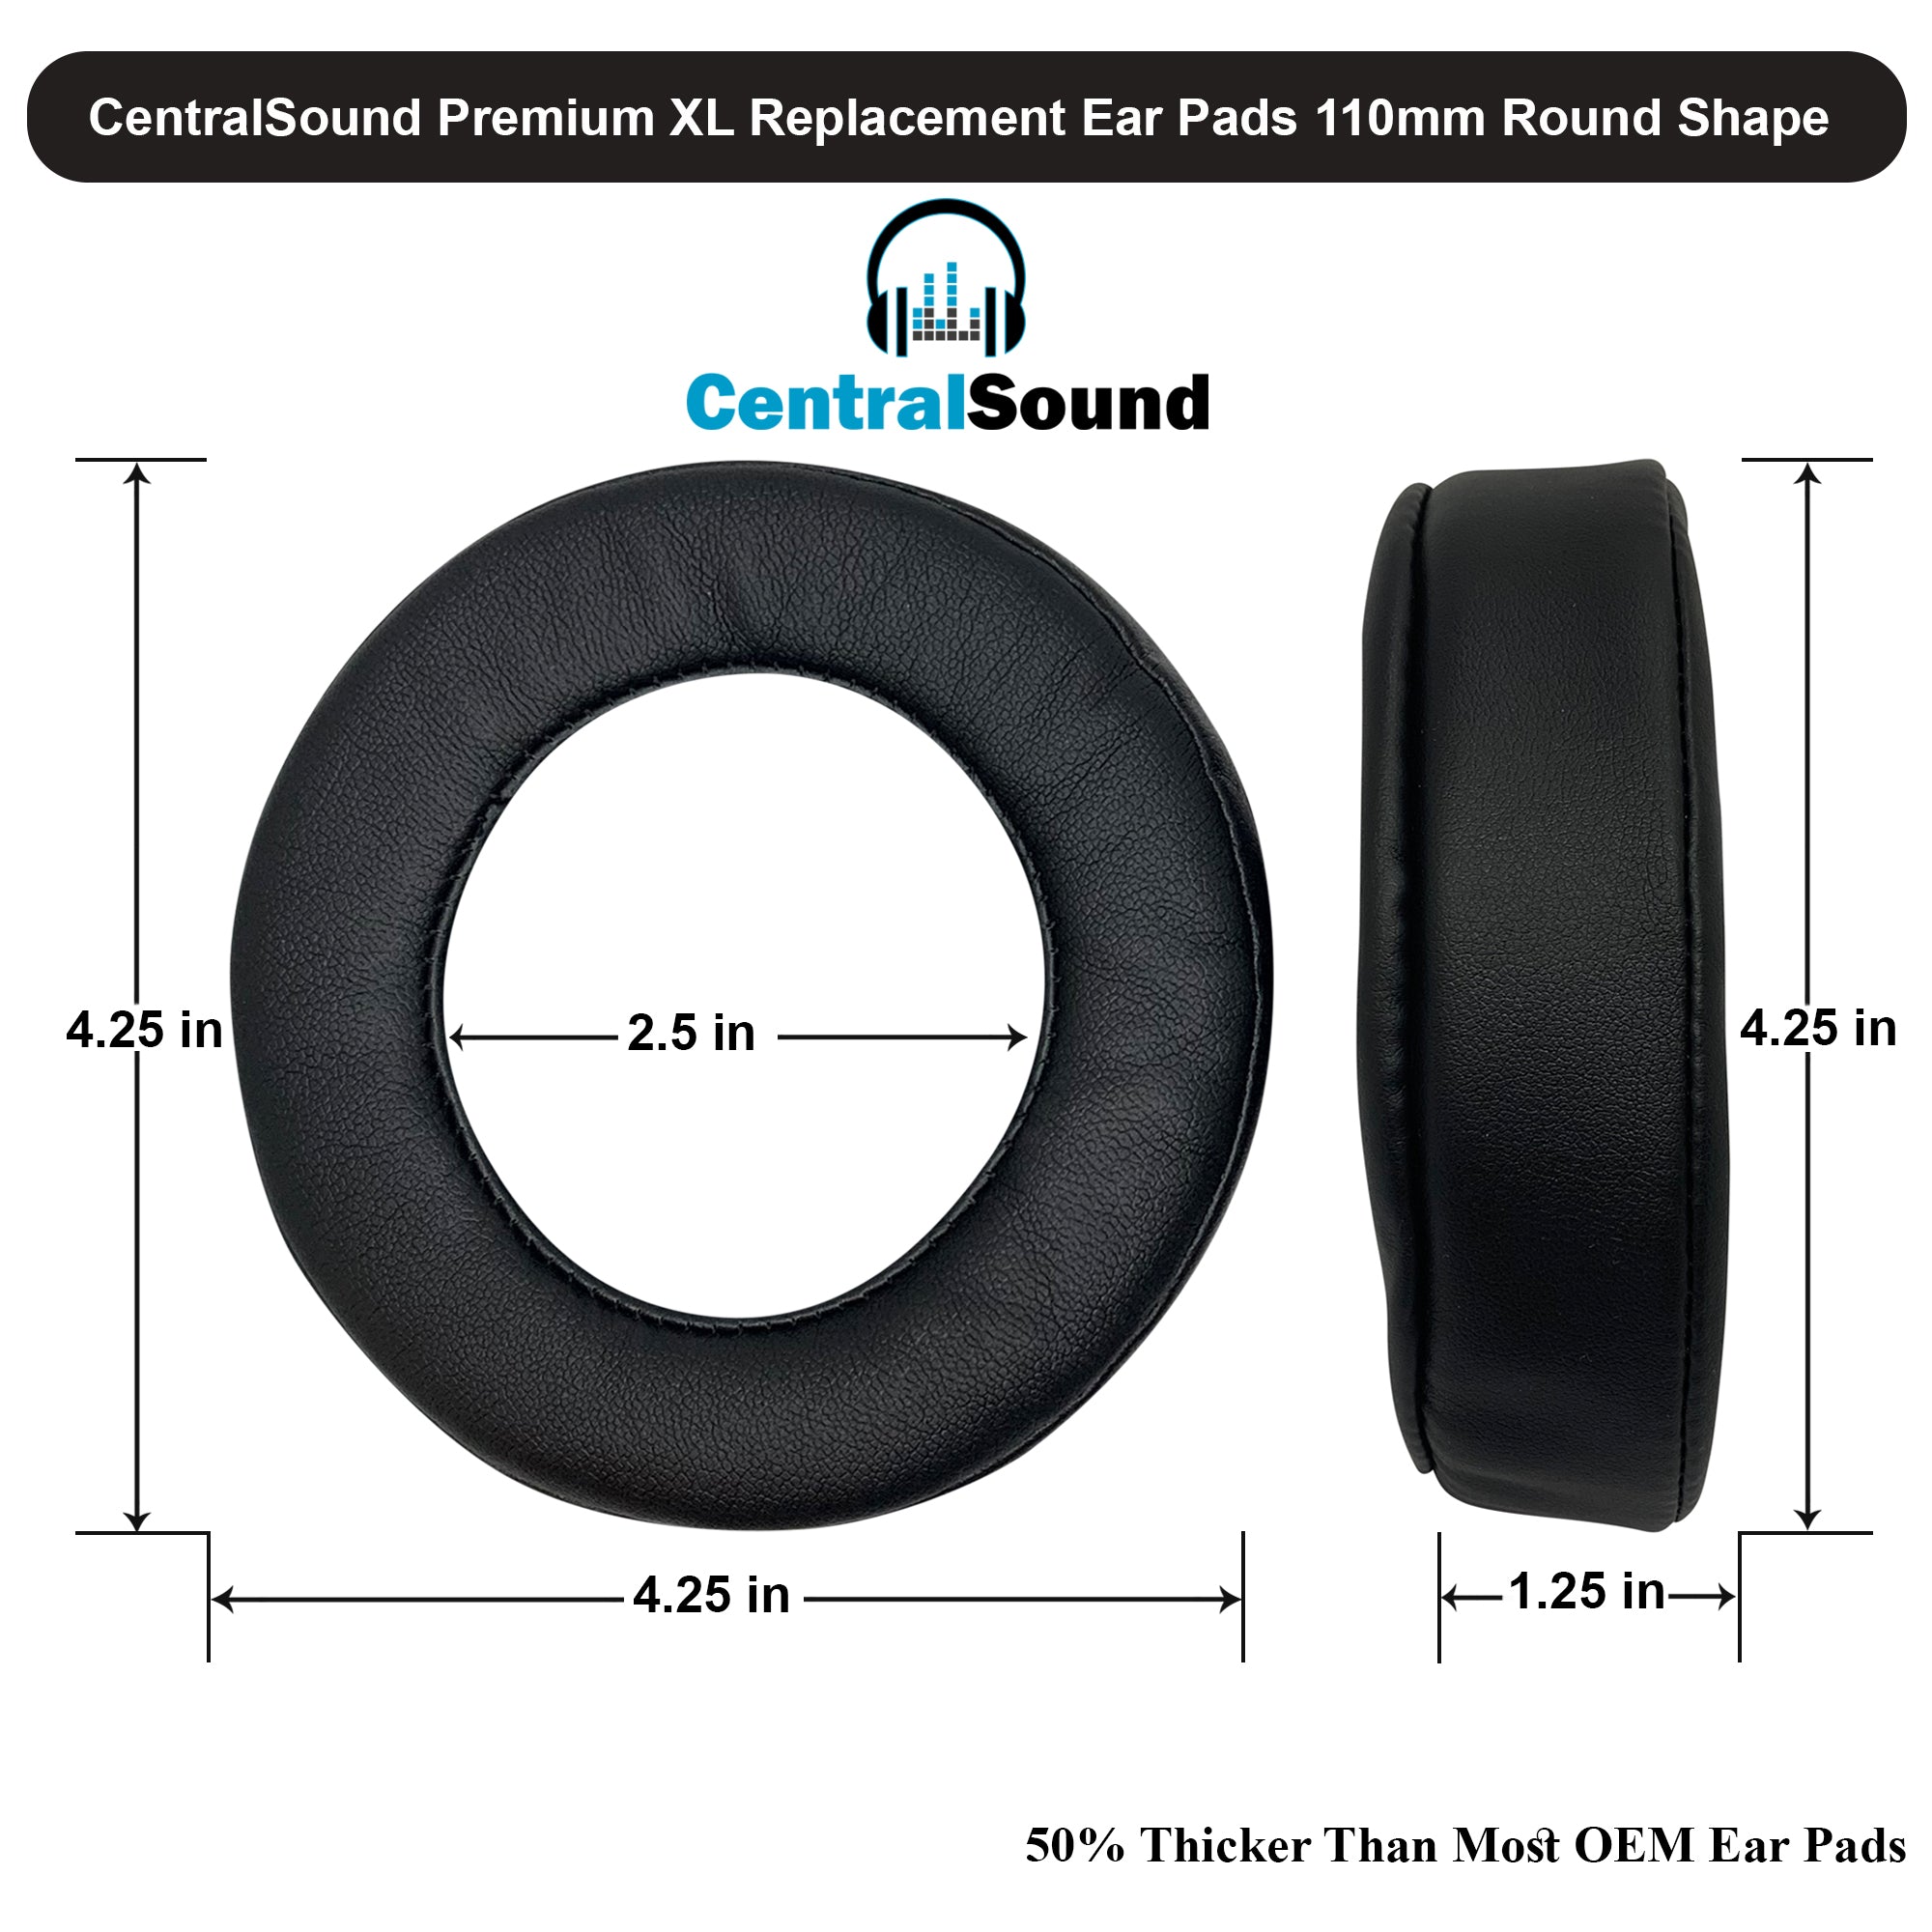 CentralSound Premium Replacement Ear Pad Cushions Round 110mm Soft Protein Leather Memory Foam - CentralSound